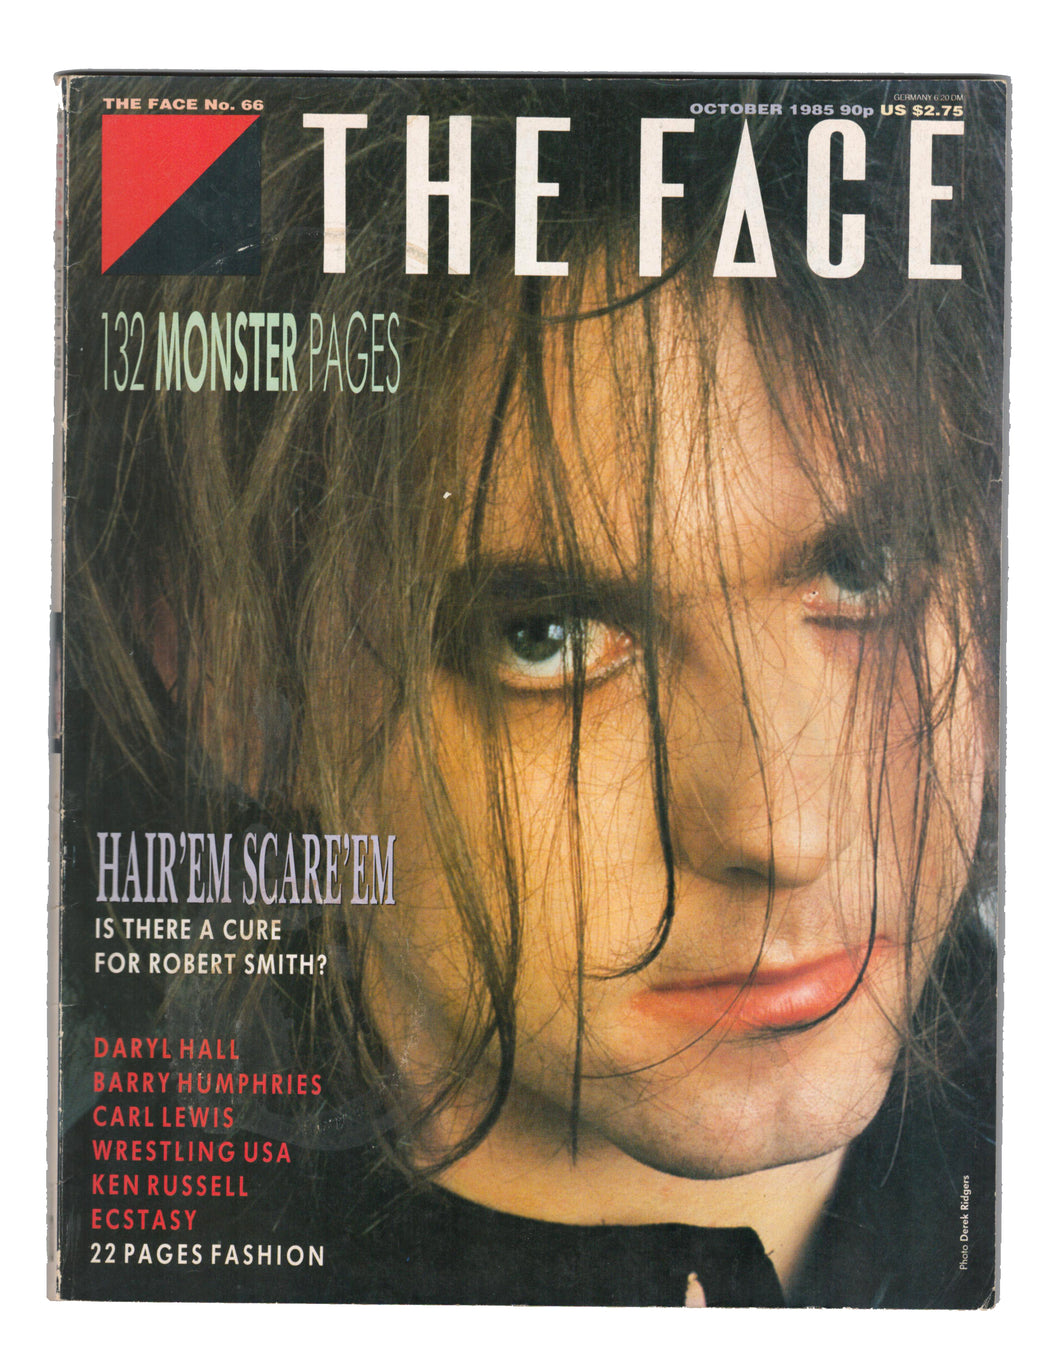 The Face No 66 Oct 1985